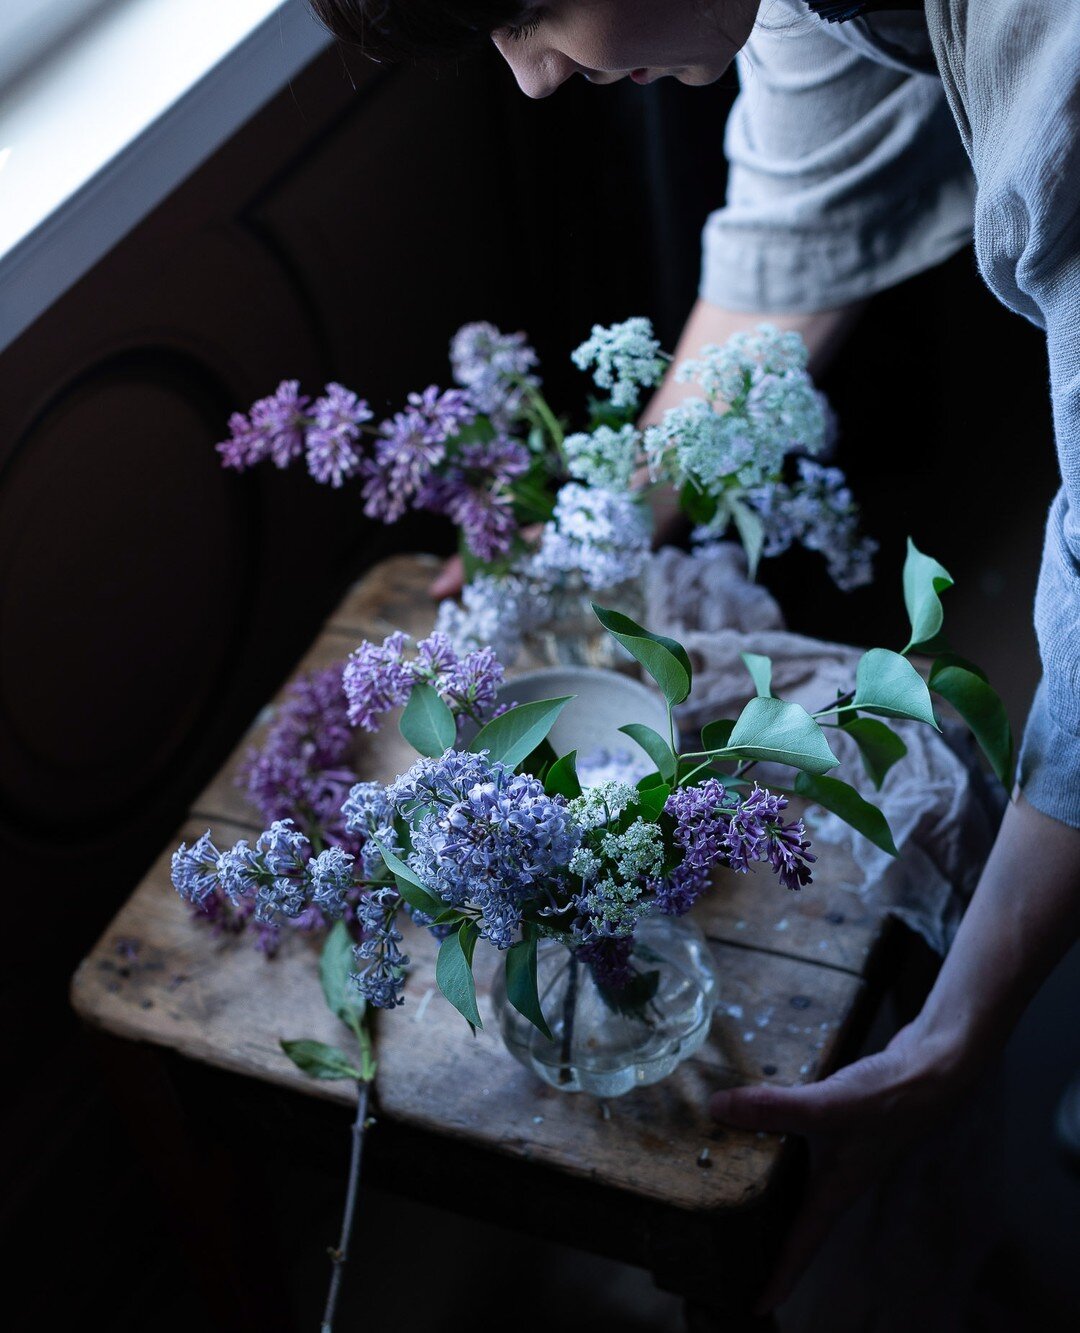 Throwback on a few days spent in Norway what feels like a lifetime ago in company of @linda_lomelino (styling for us a beautiful table full of lilacs), @adelasterfoodtextures @cottagefarm, @blackwhitevivid and @thebotanicalkitchen. Days spent styling